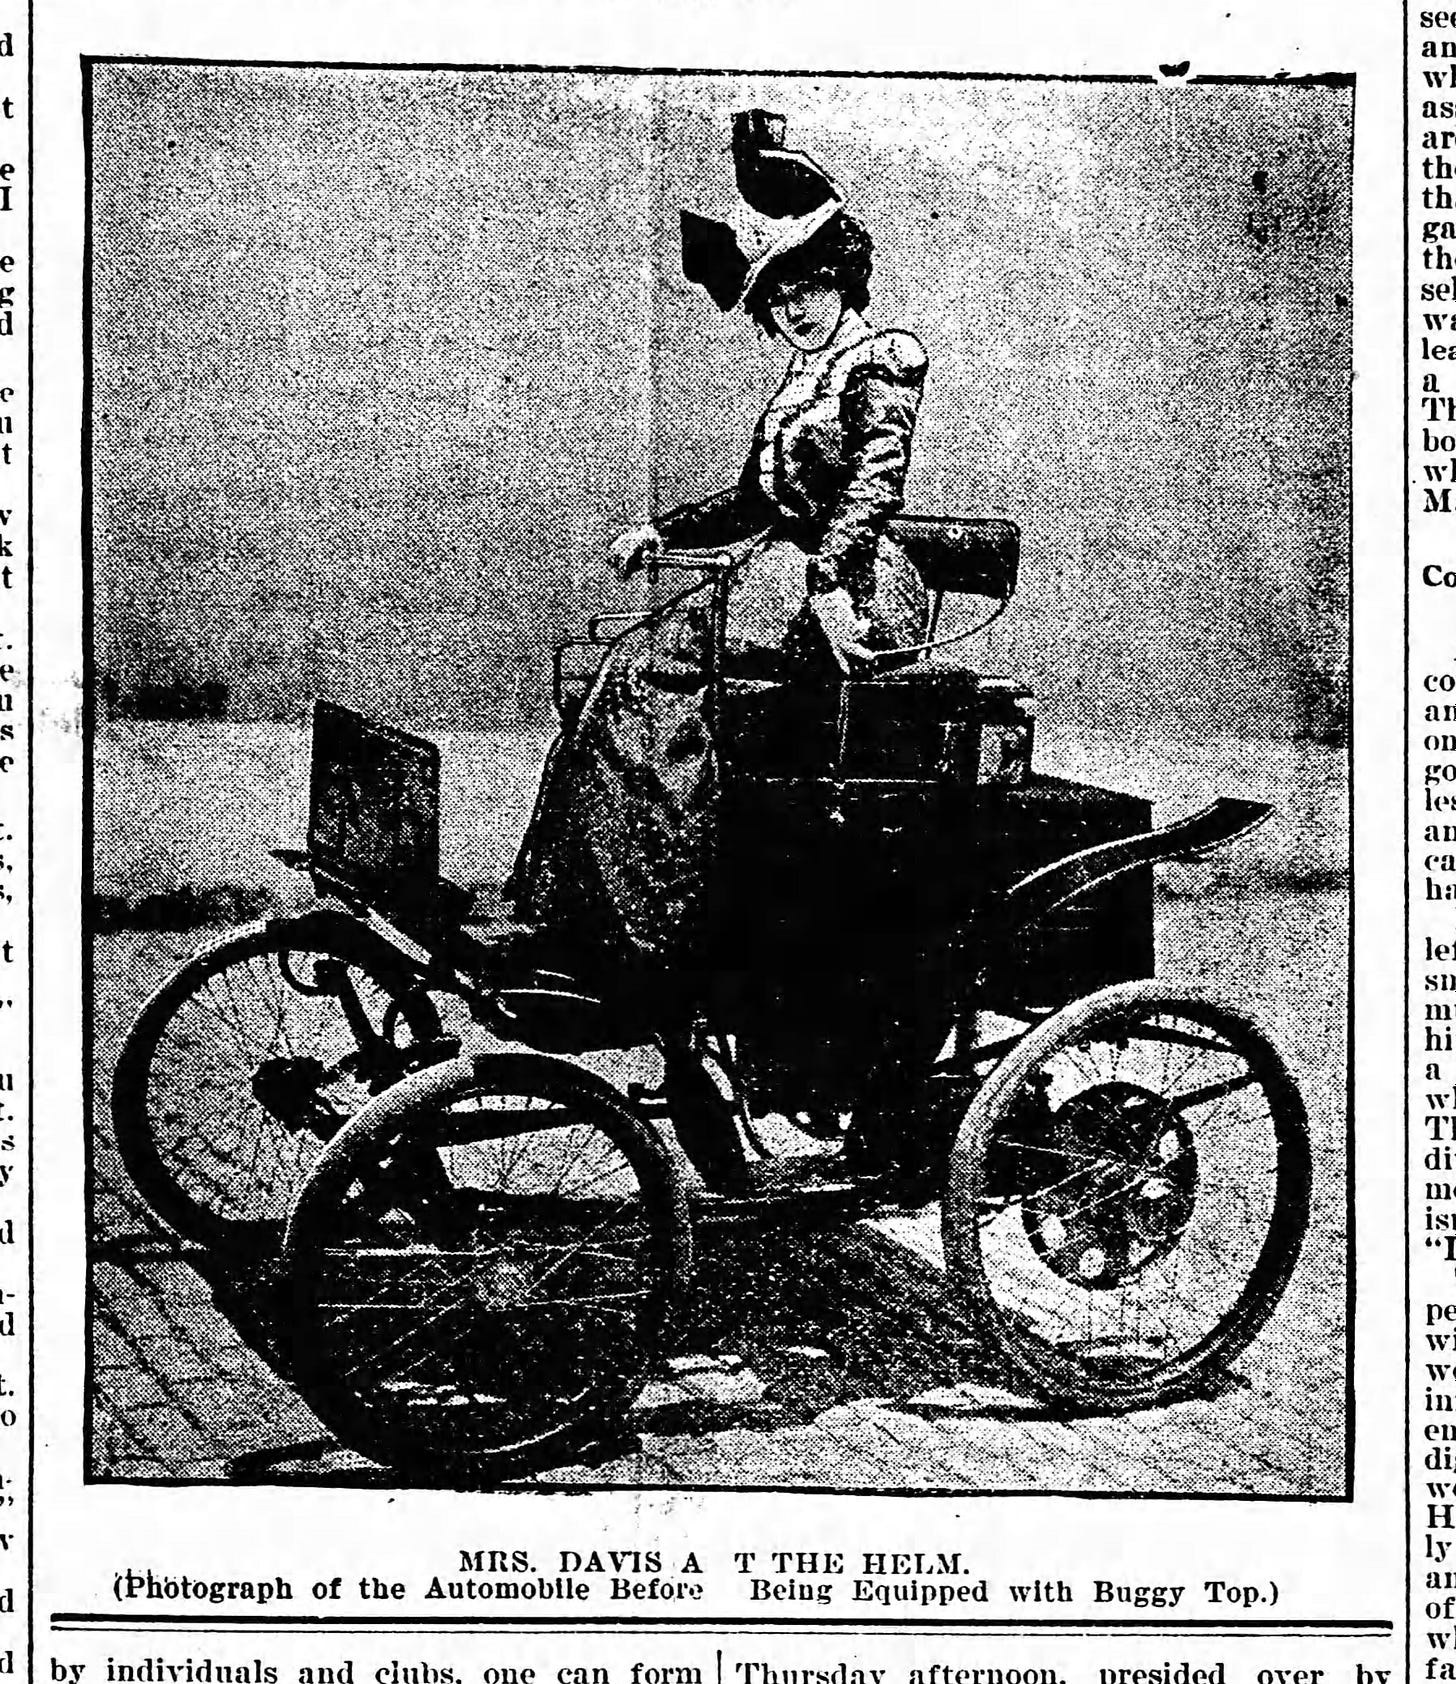 Photo from The Virginia Enterprise (Virginia, Minnesota, Friday, July 21, 1899) of a woman in period clothing (a dress covering the ankles, tight waist, closed collar, long sleeves, and fashionable hat) sitting at the helm of a Duryea automobile. The Duryea resembles horse-drawn carriages of the era and features four spoked wheels that look like wheels from a bicycle, a stylish padded seat, and a tiller for steering. Caption reads, "MRS. DAVIS AT THE HELM. (Photograph of the Automobile Before Being Equipped with Buggy Top.)"